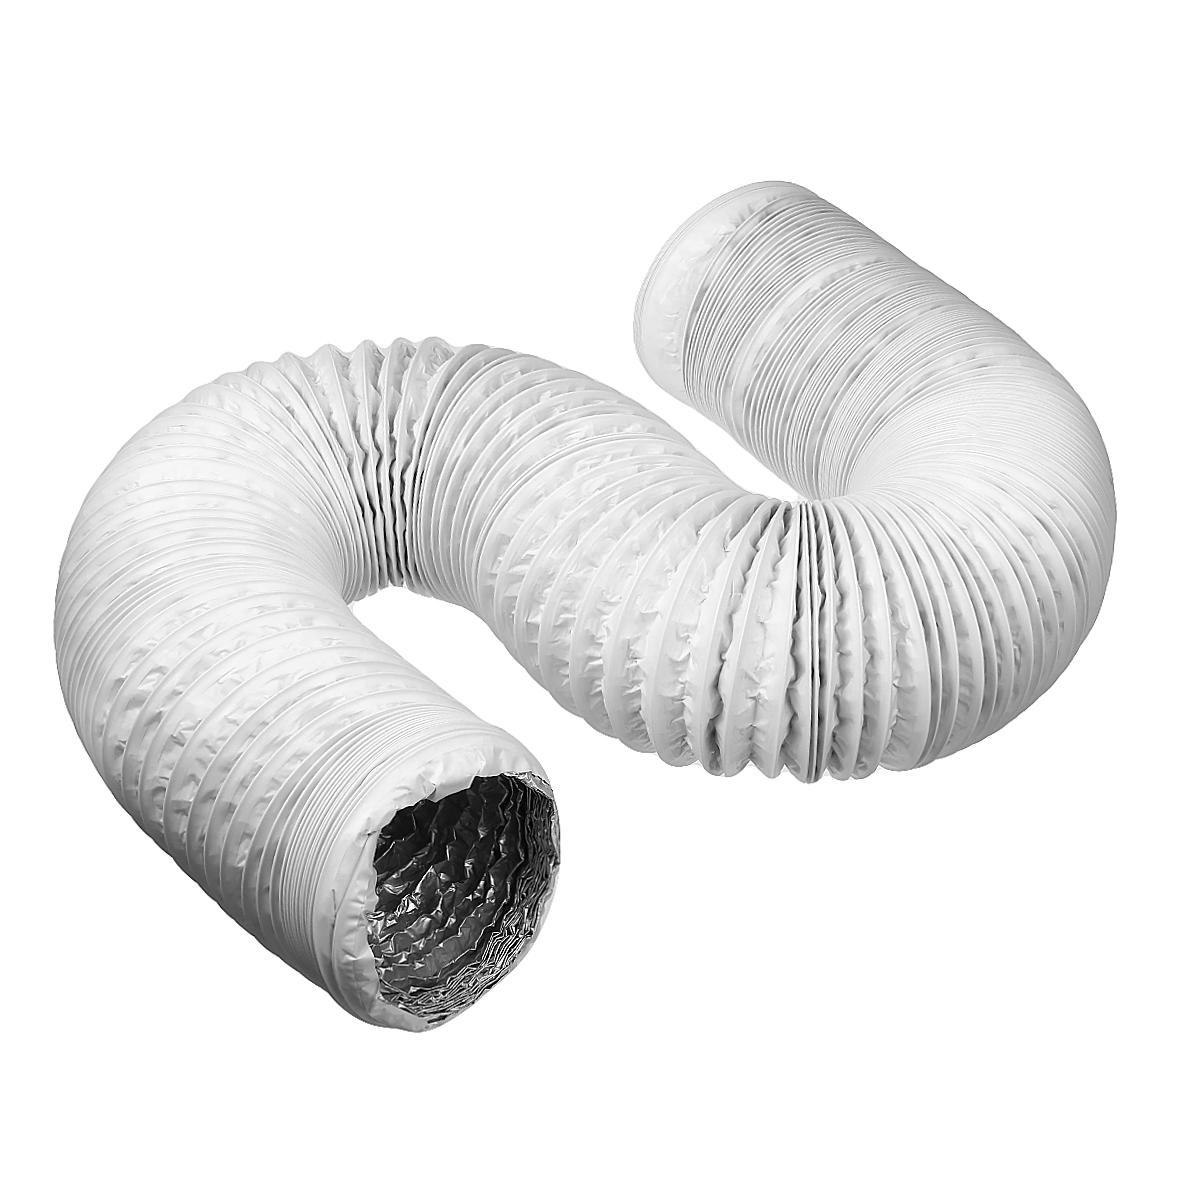 DIA15cm/6 Inch 6M Flexible Air Conditioner Exhaust Hose For Portable Air Conditioner